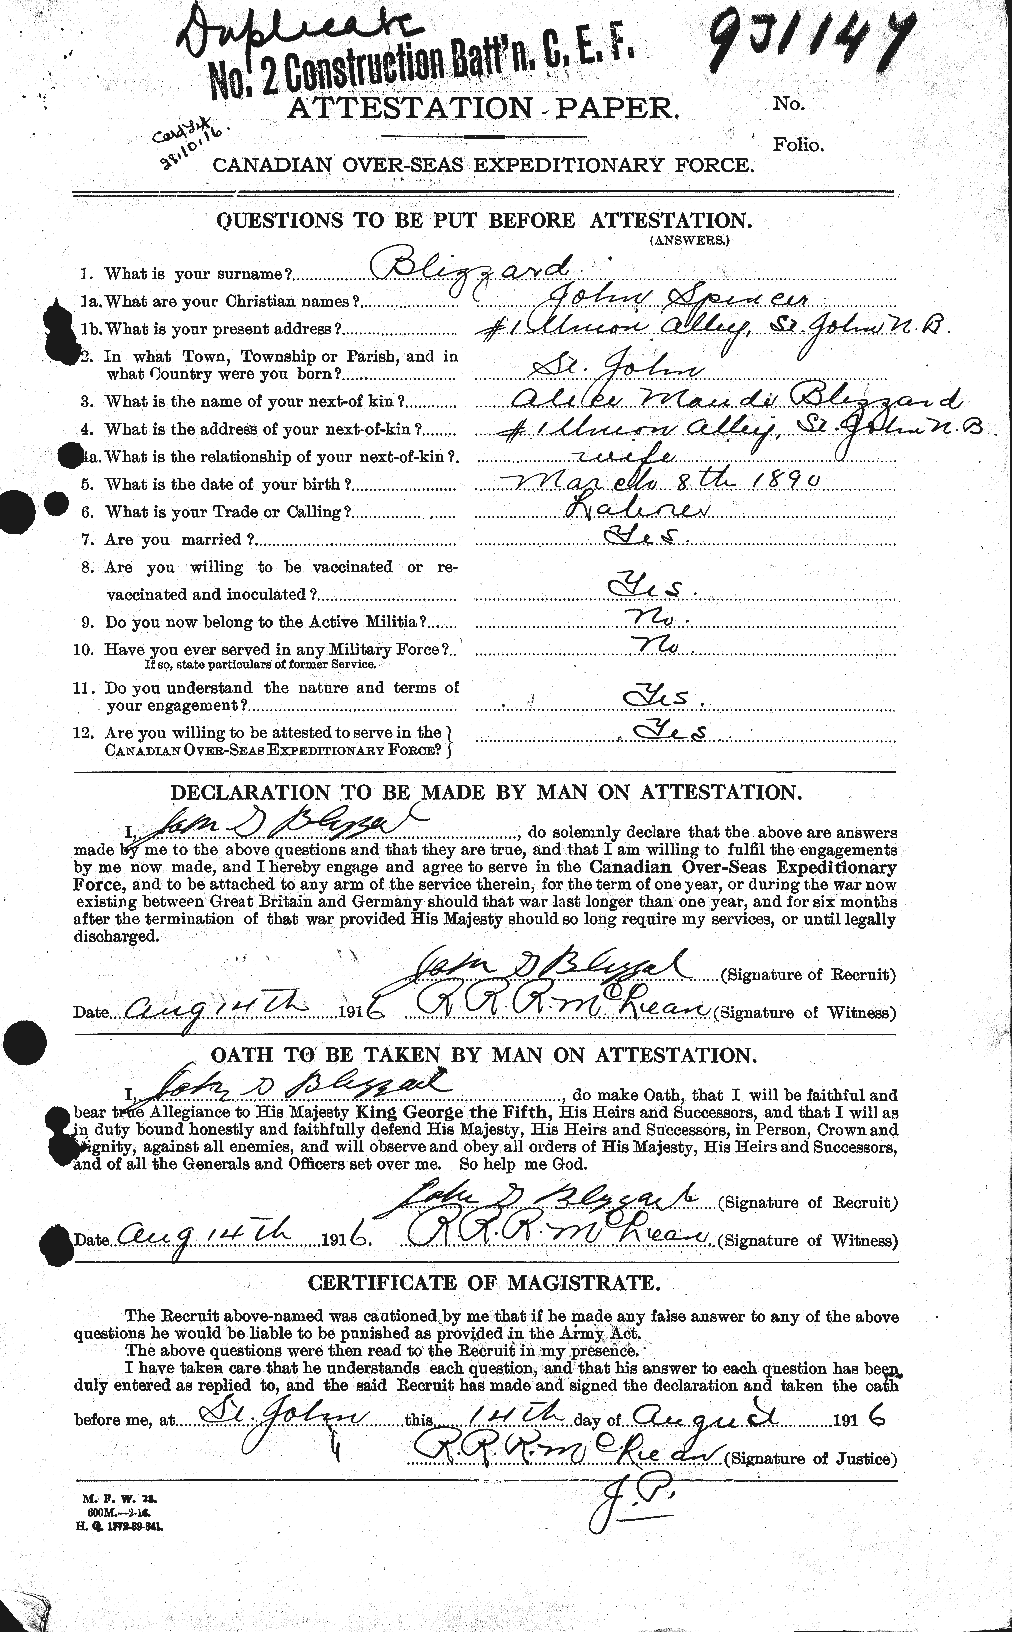 Personnel Records of the First World War - CEF 248401a